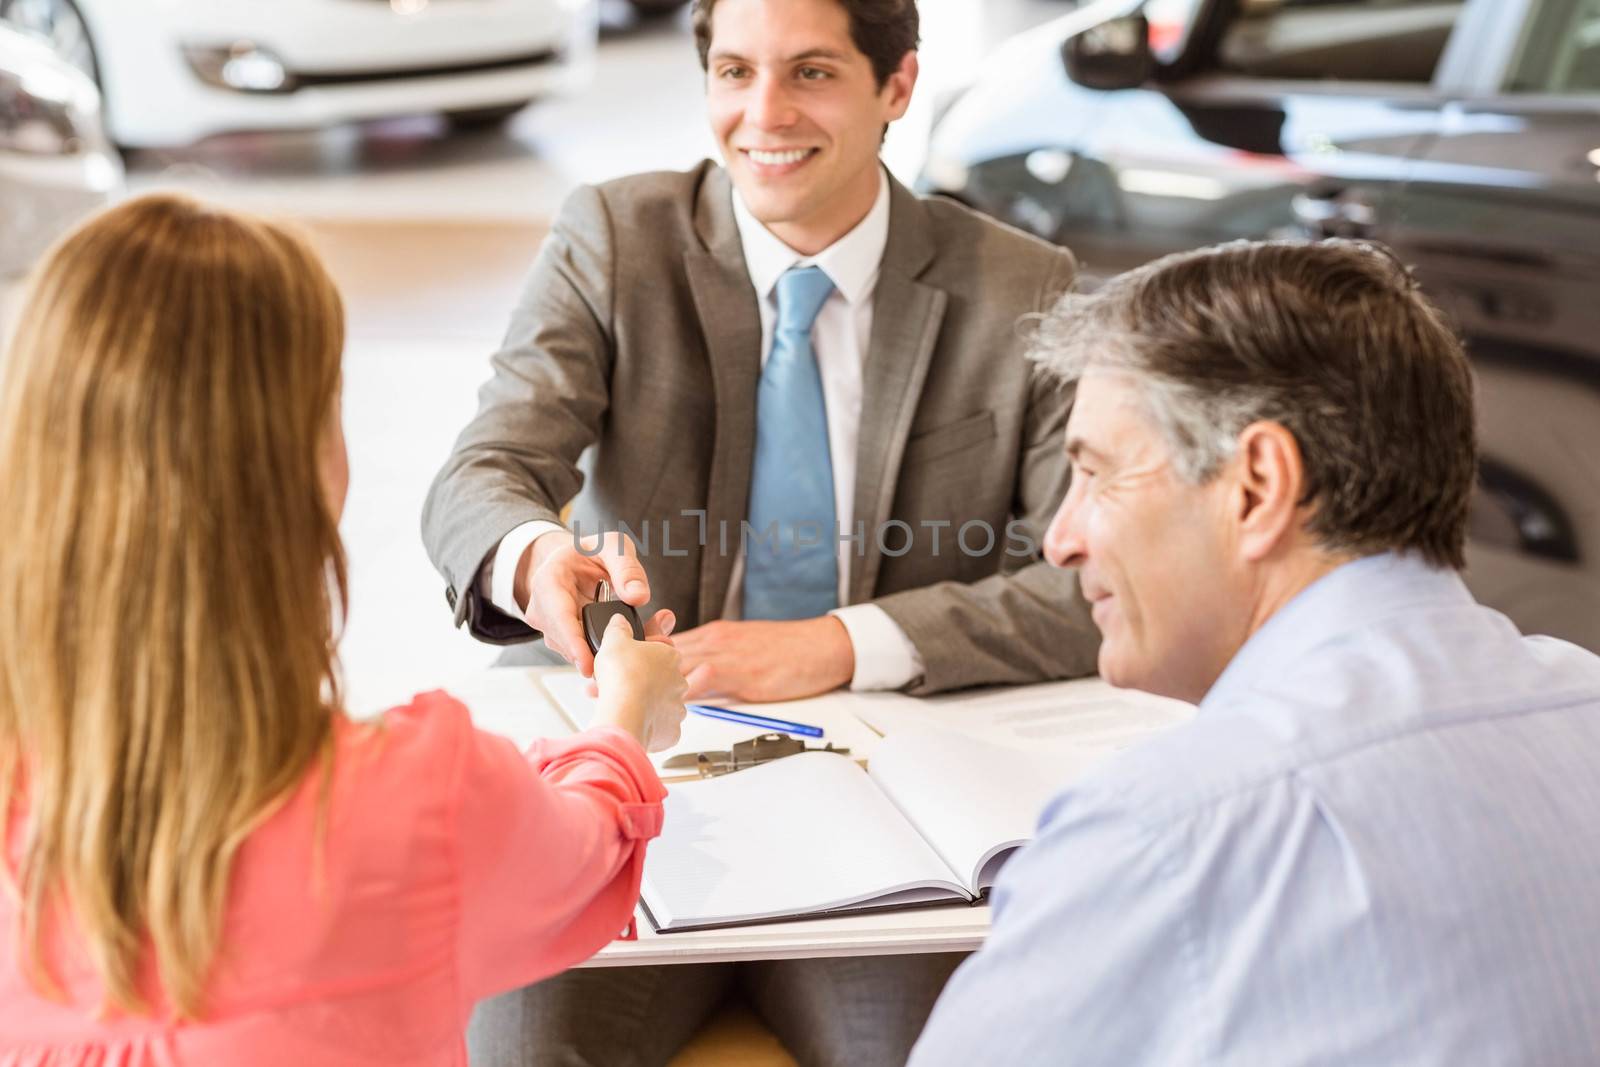 Smiling couple buying a new car by Wavebreakmedia